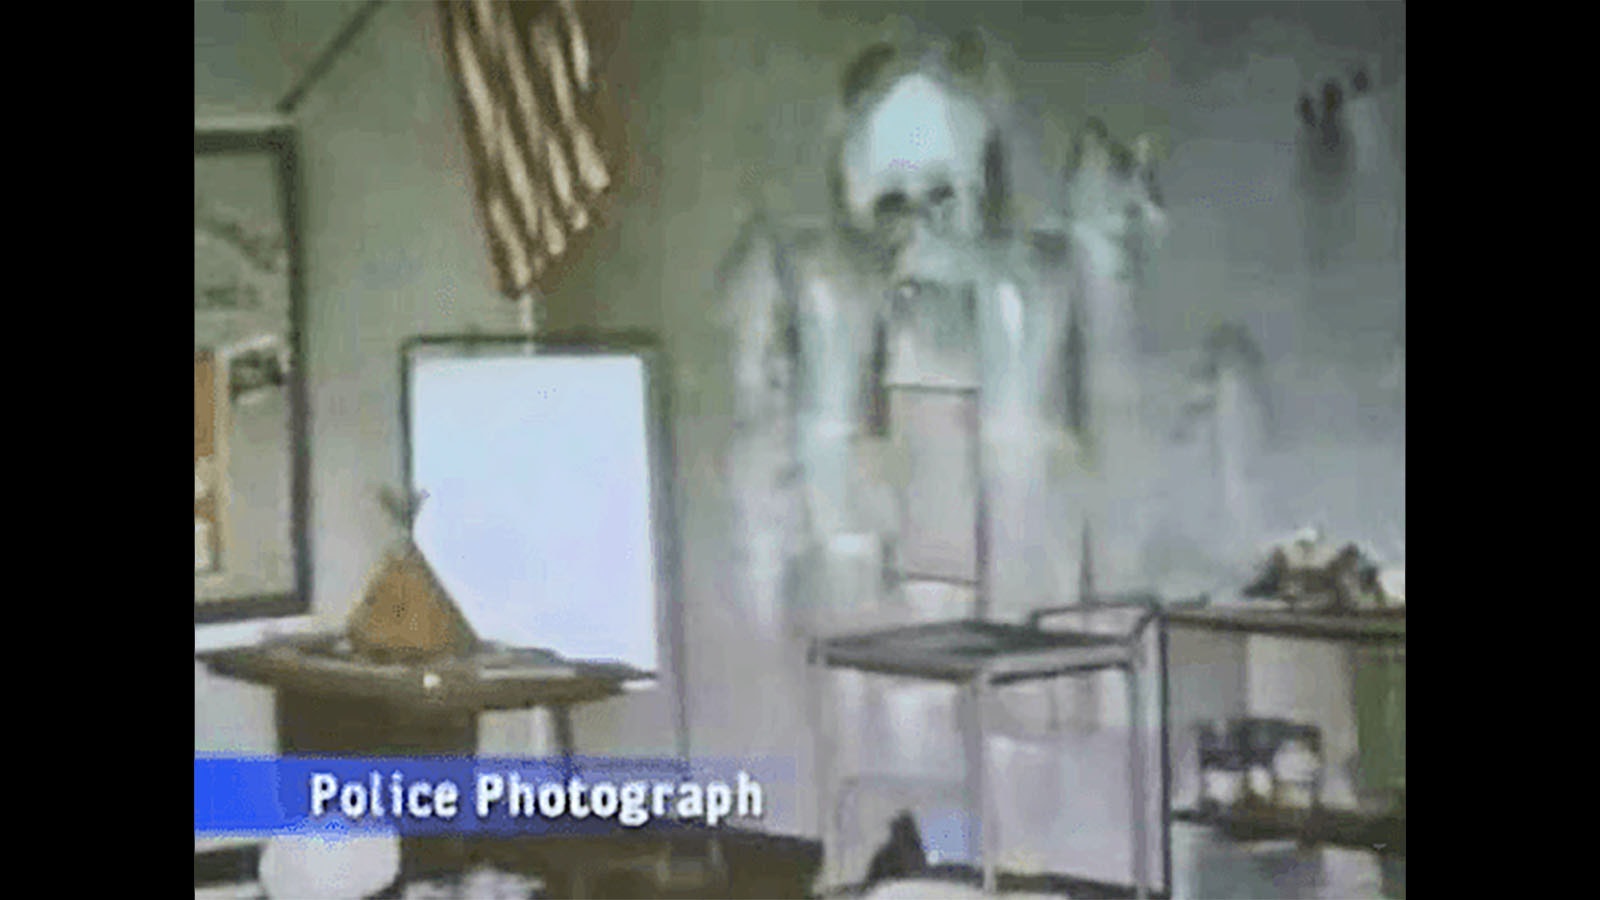 This photograph taken by police in the investigation after the Cokeville Elementary School bombing shows a peculiar outline on the wall. Many of the students reported seeing and being helped by angels during the ordeal and right after the explosion. Some say the outline represents one of those angels.